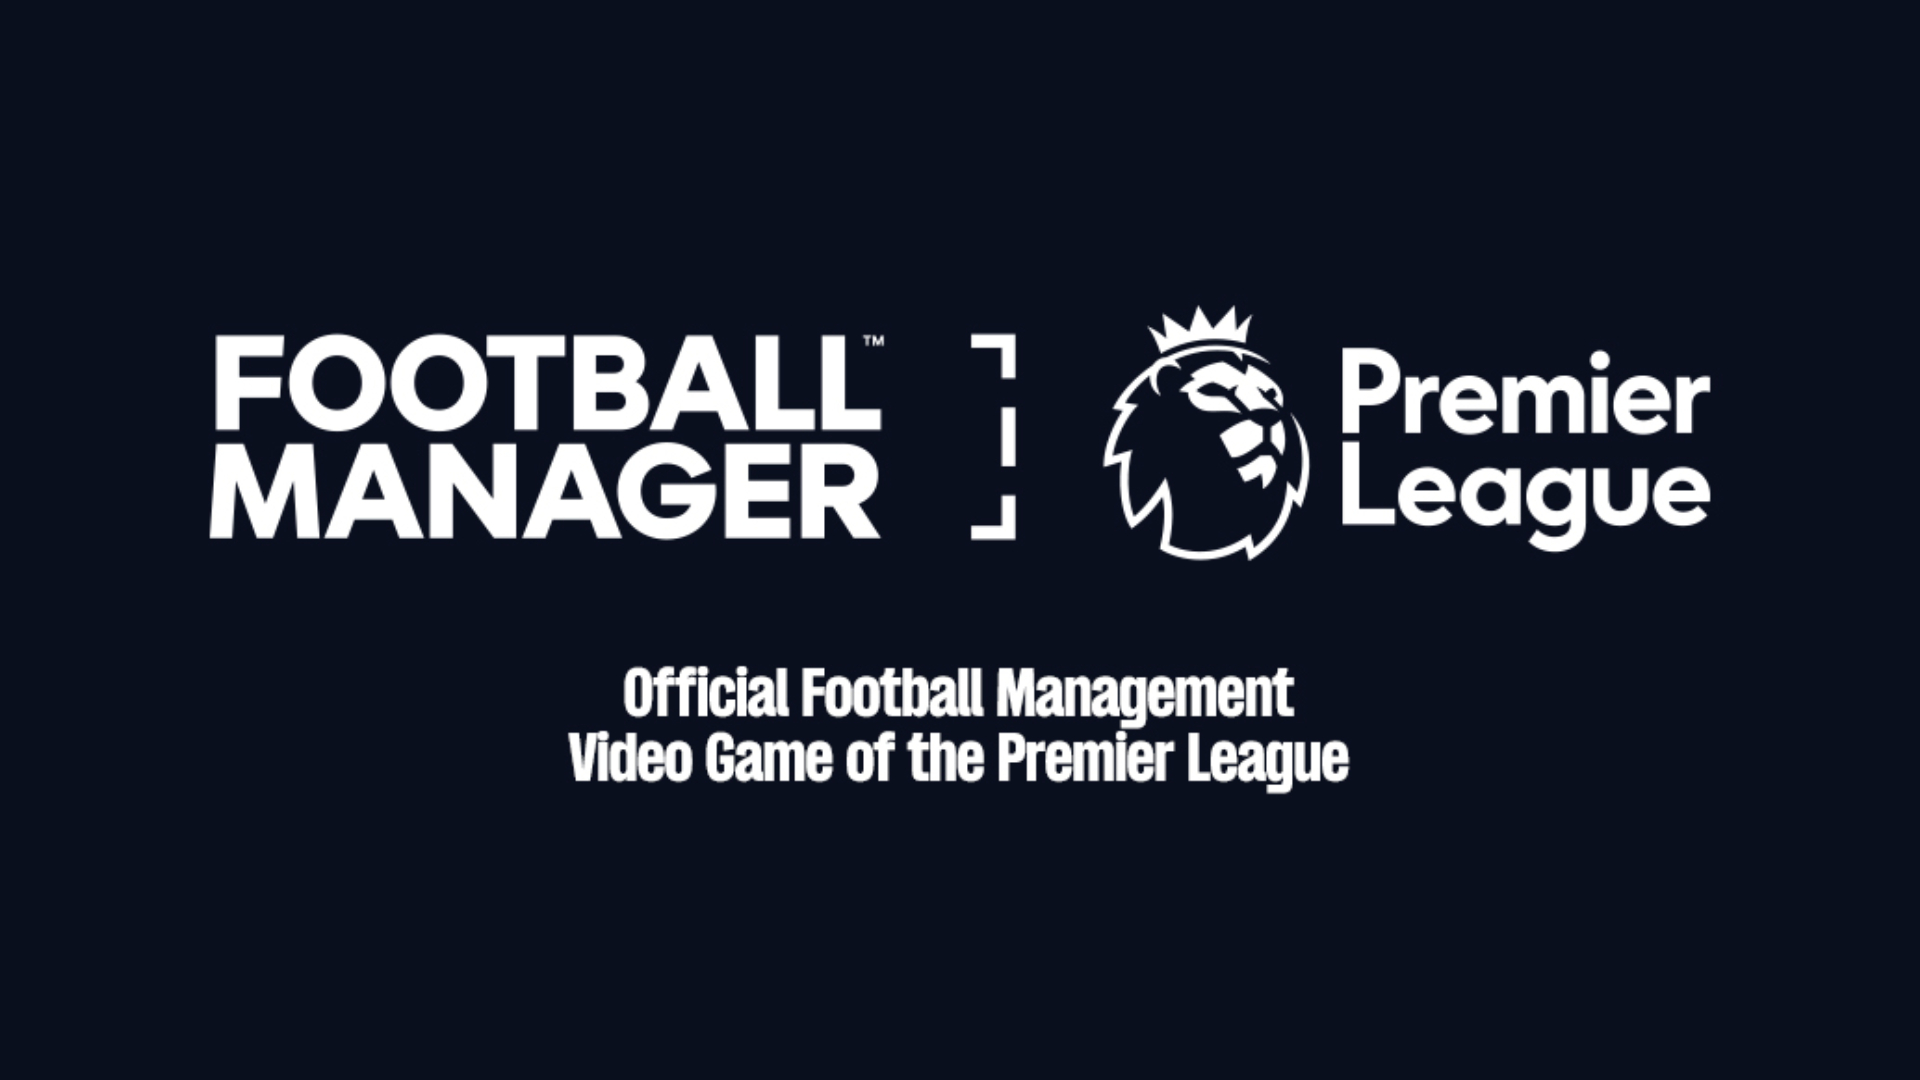 Football Manager Secures Premier League Licensing Deal